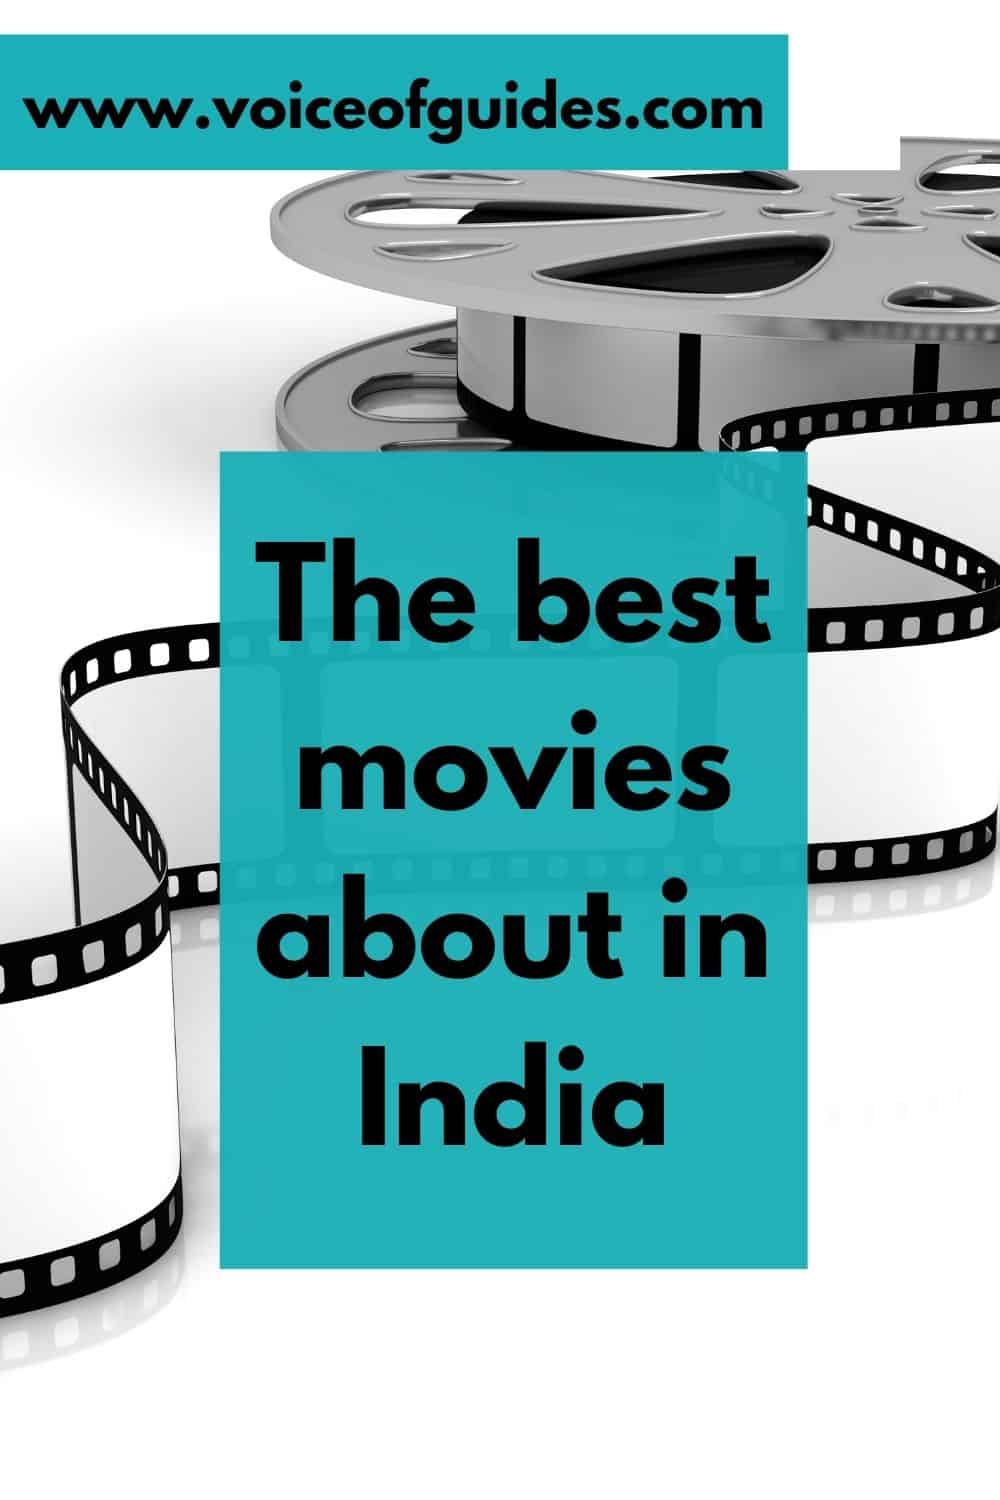 One of the best ways to learn more about a country is to watch movies. This  is a list of the best films, series of Bollywood, British and American movies about India, including dramas comedies and biographies # Indian movies #best films about India #Indian cinema  